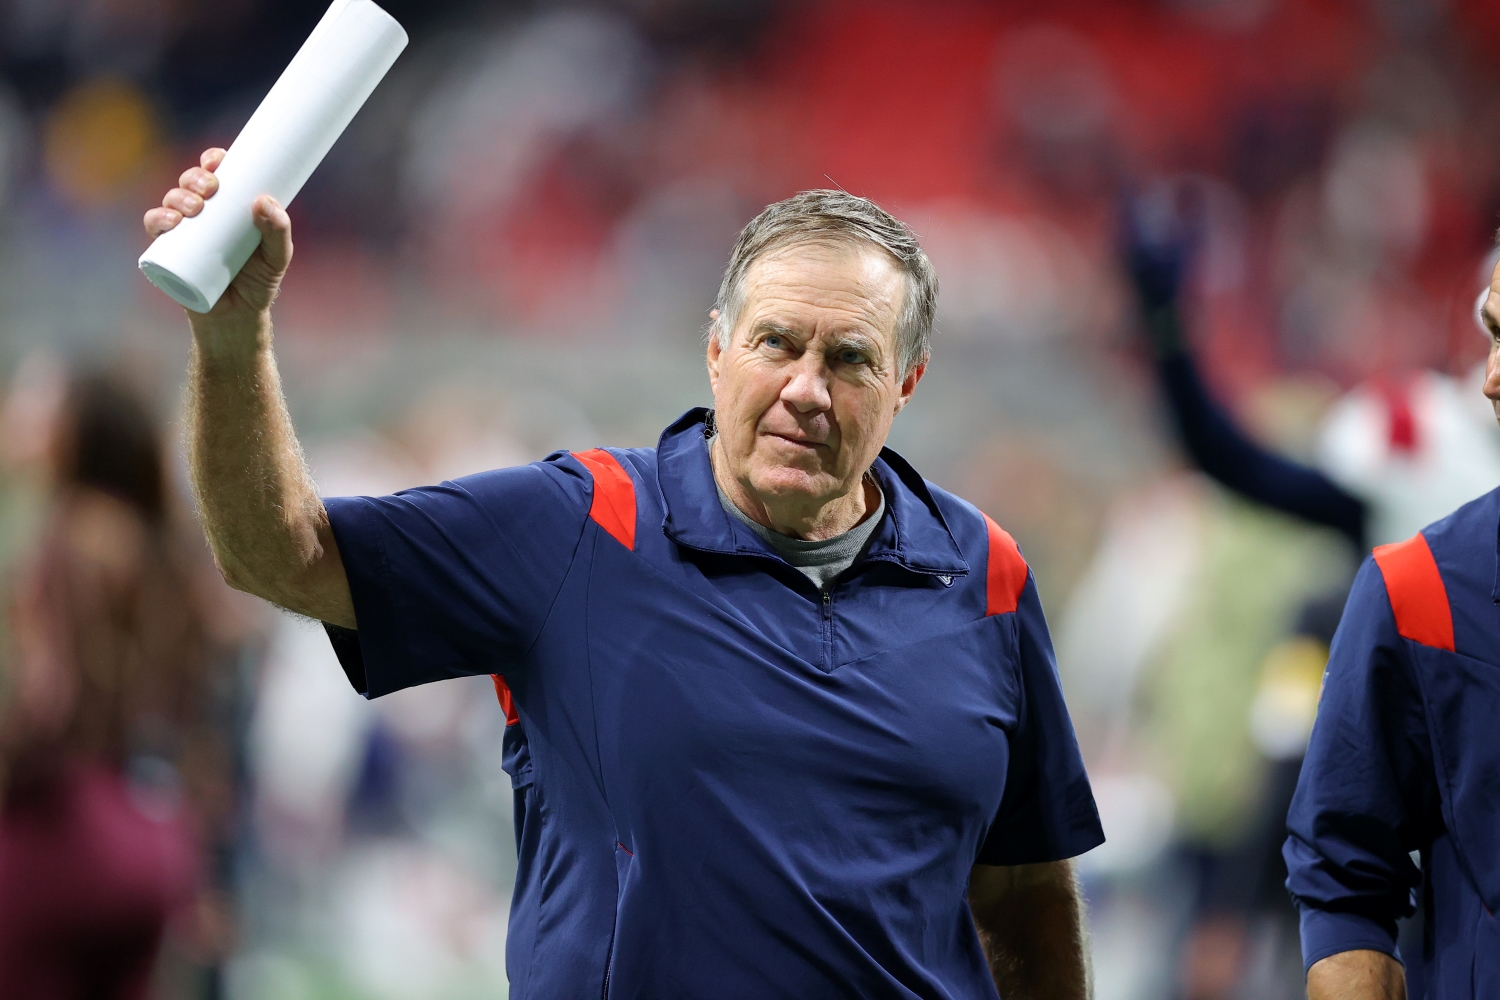 New England Patriots head coach Bill Belichick waves to the crowd after defeating the Atlanta Falcons.